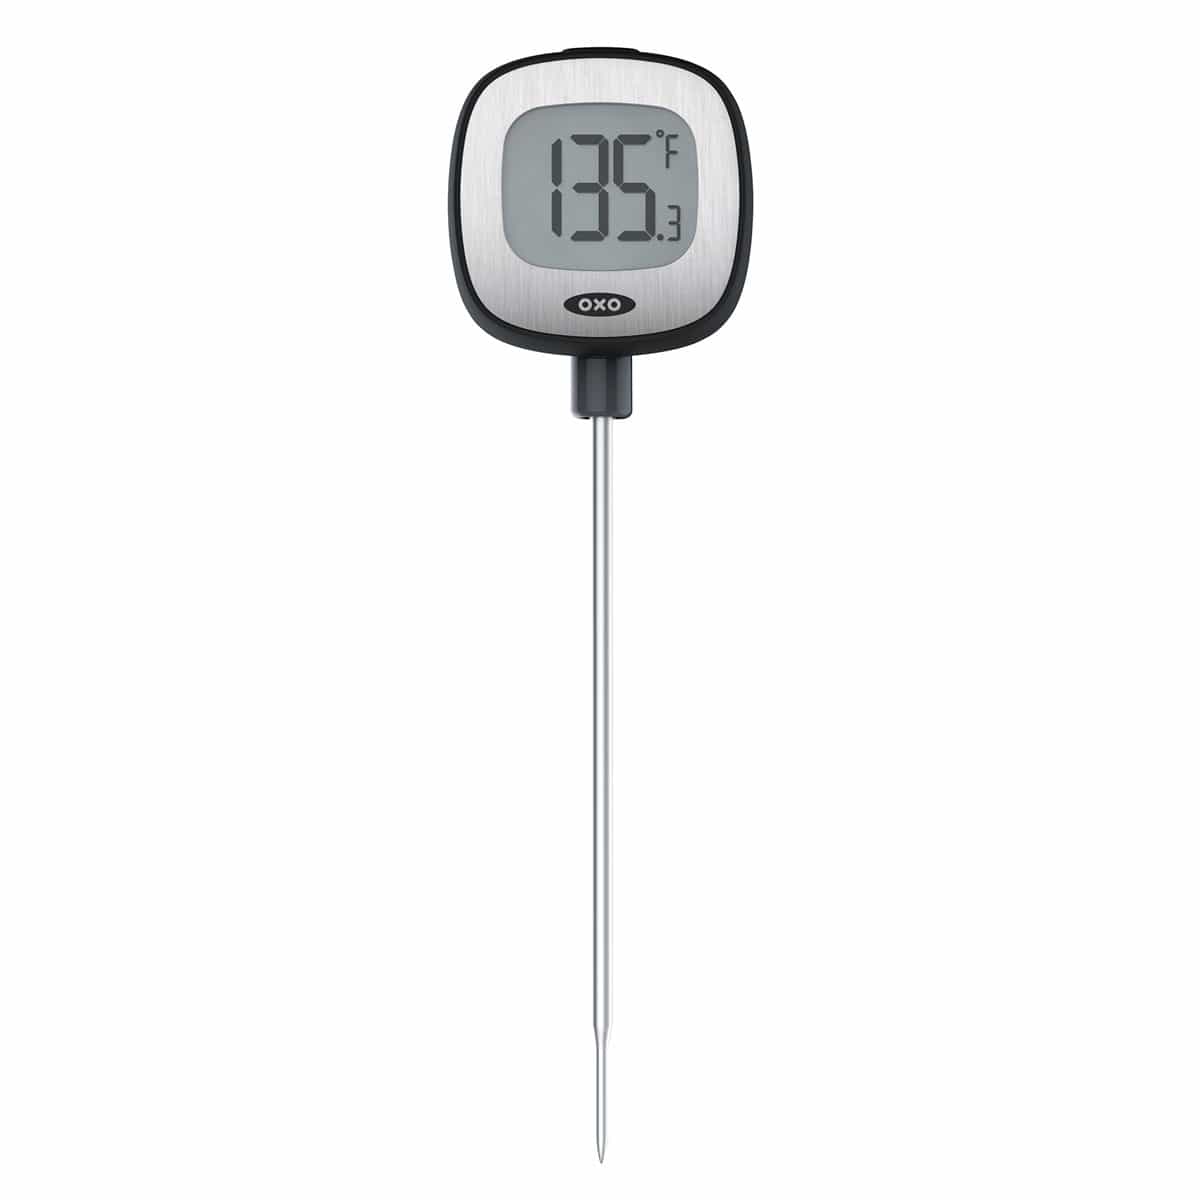  OXO Good Grips Thermocouple Thermometer, Digital